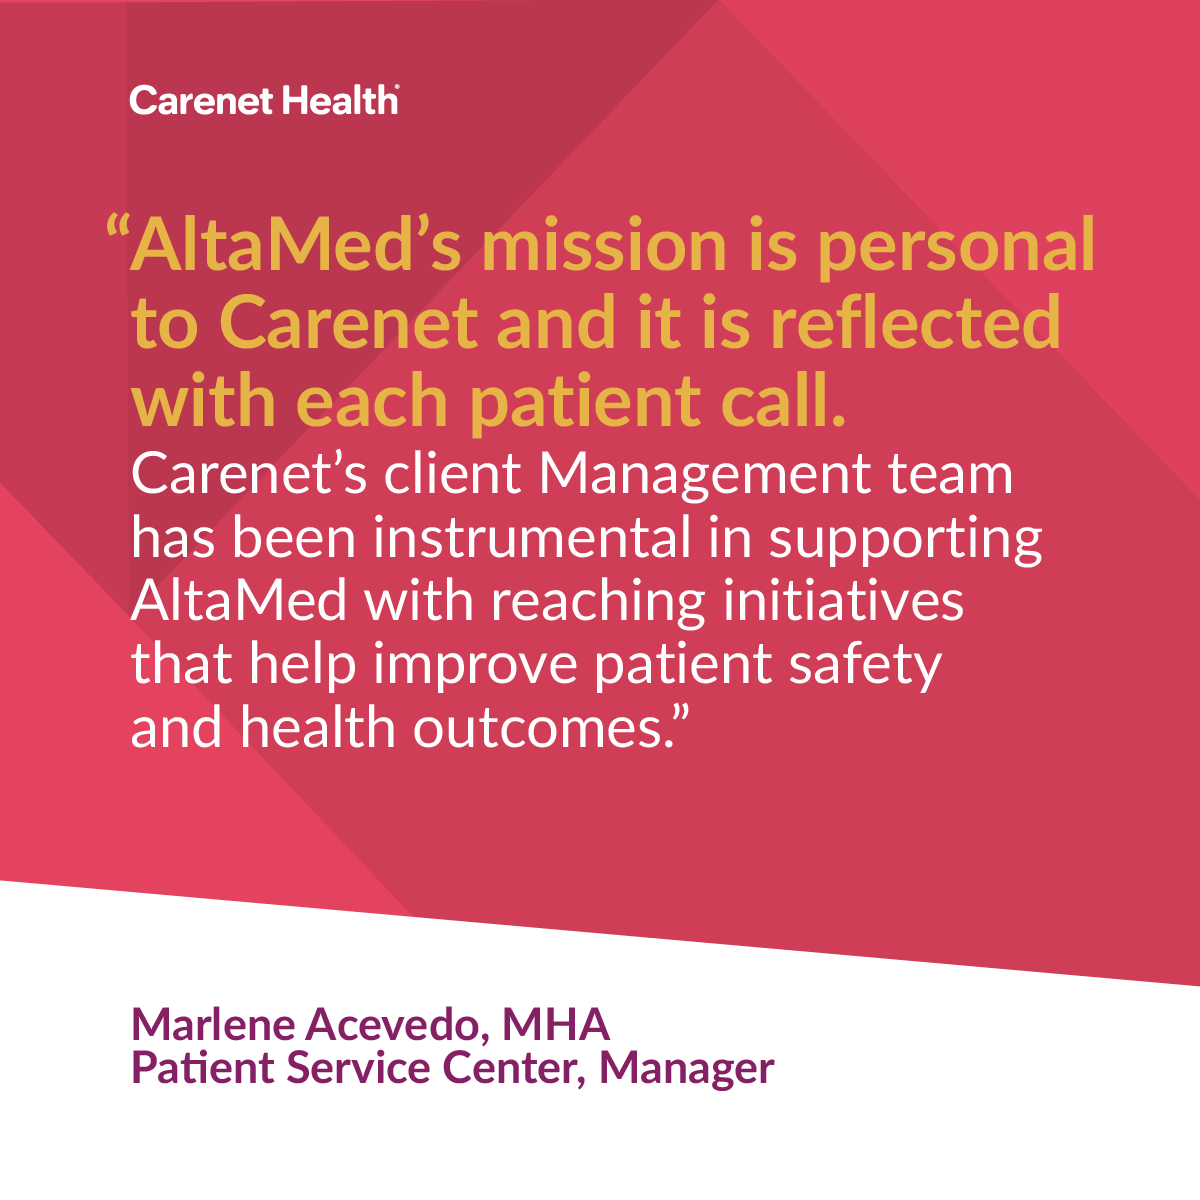 Real Results, Real Satisfaction! Listen to AltaMed share their experience working with us and how our solutions have positively impacted their organization's efficiency and patient outcomes. #ClientTestimonial #B2BHealthcare